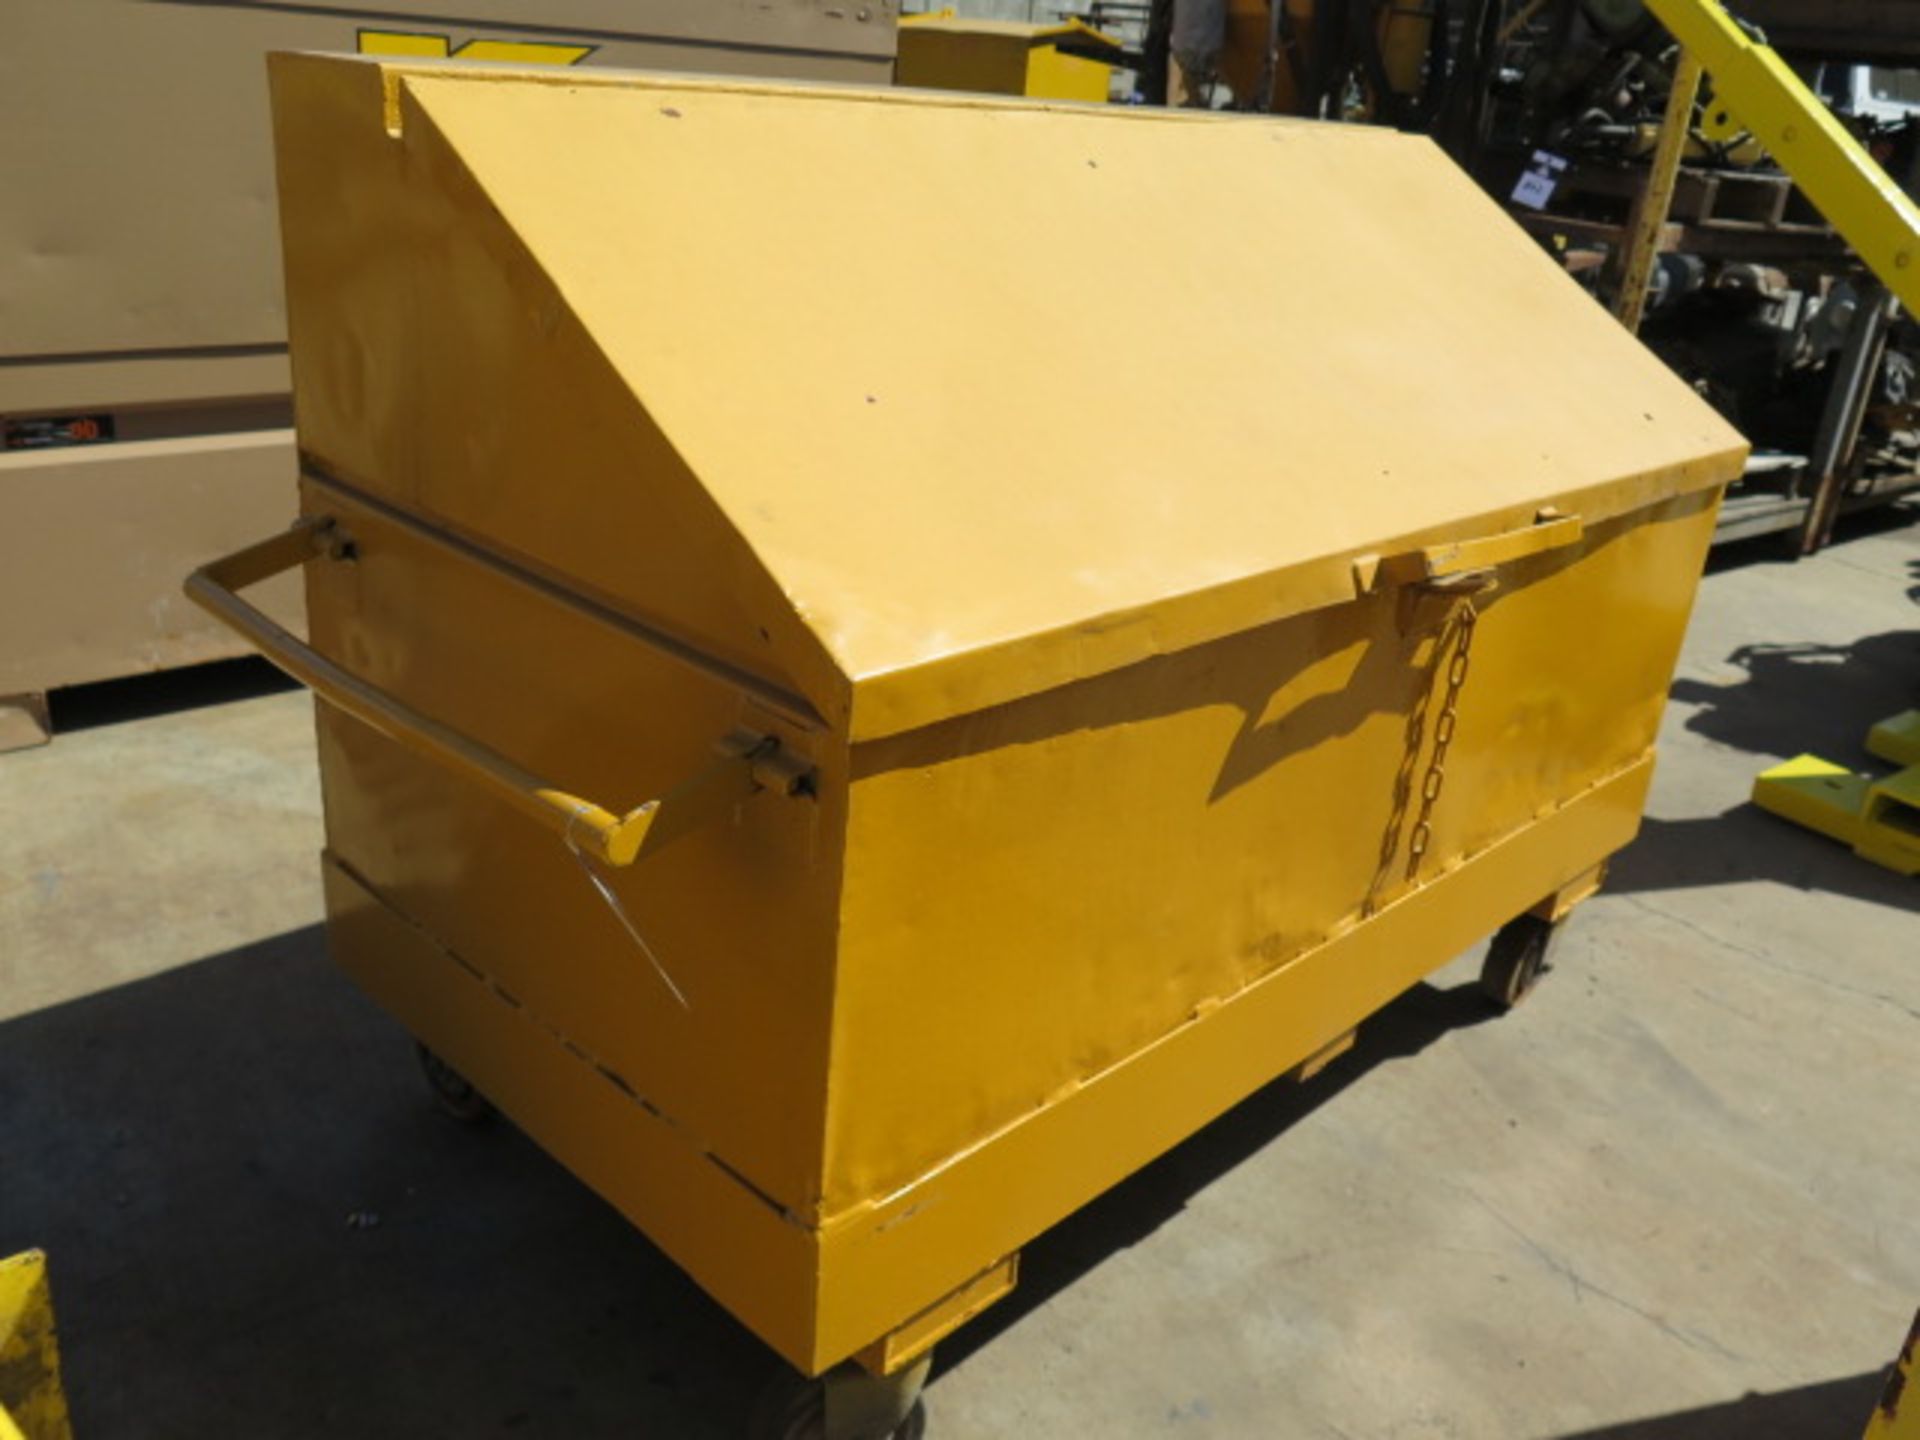 Rolling Job Site Storage Box (SOLD AS-IS - NO WARRANTY)